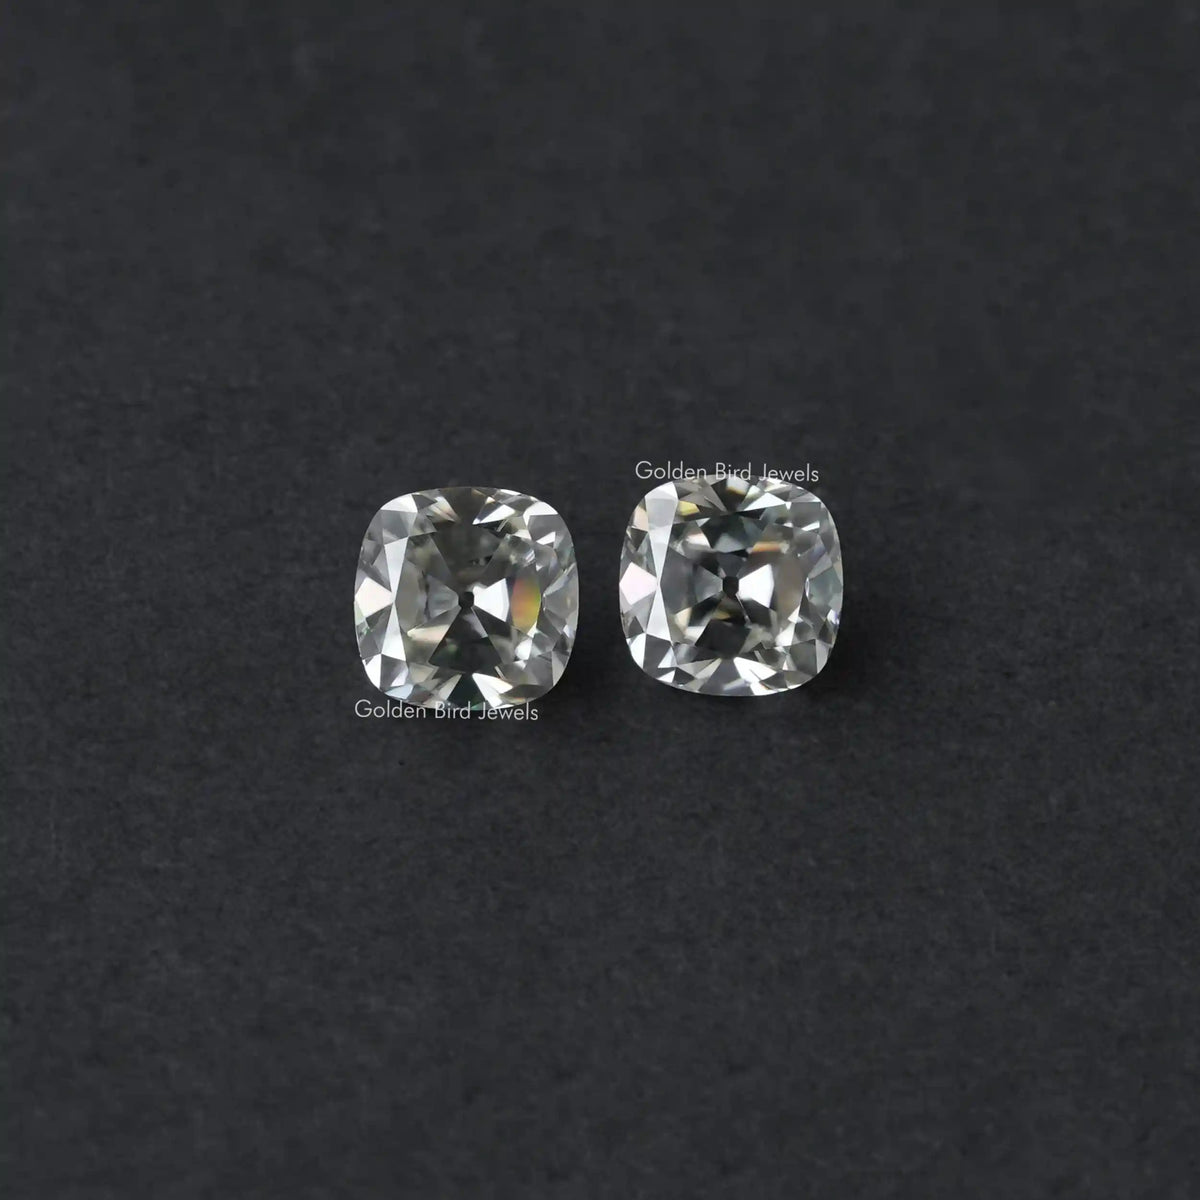 [This cushion cut loose stones made of off-white color]-[Golden Bird Jewels]